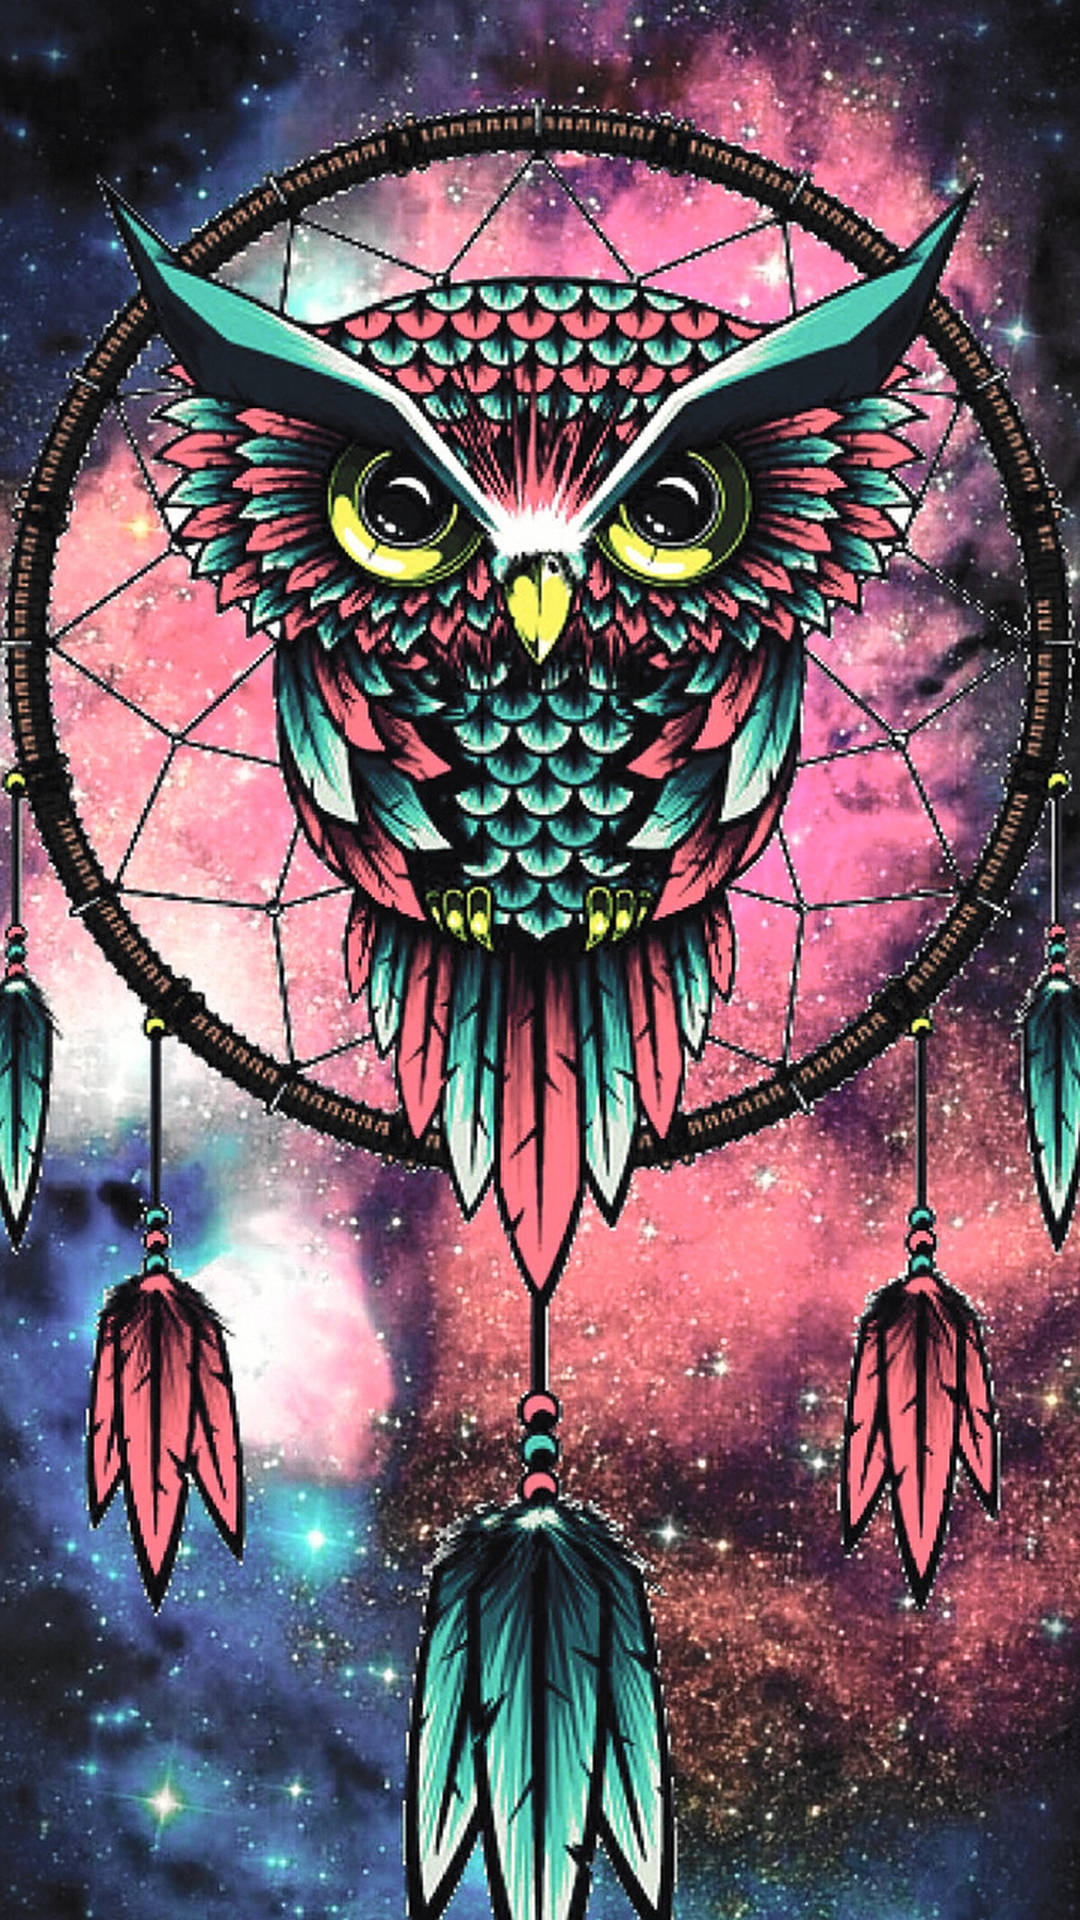 Top 999+ Dream Catcher Wallpaper Full HD, 4K Free to Use